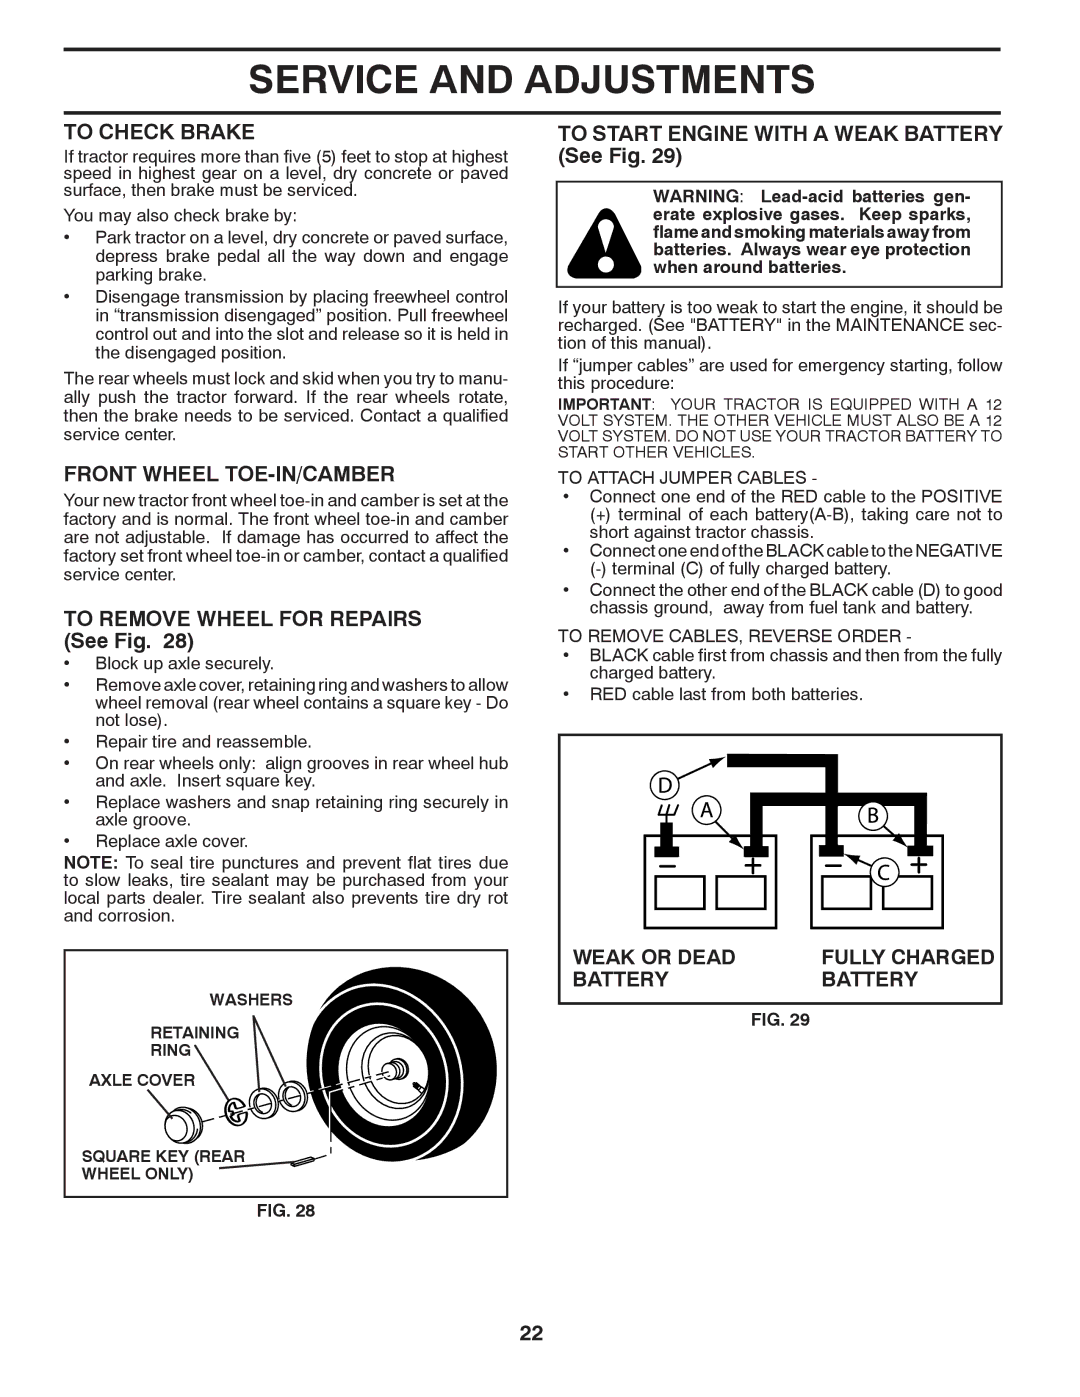 Husqvarna 2042 LS (CA) manual To Check Brake, Front Wheel TOE-IN/CAMBER, To Remove Wheel for Repairs See Fig, Weak or Dead 